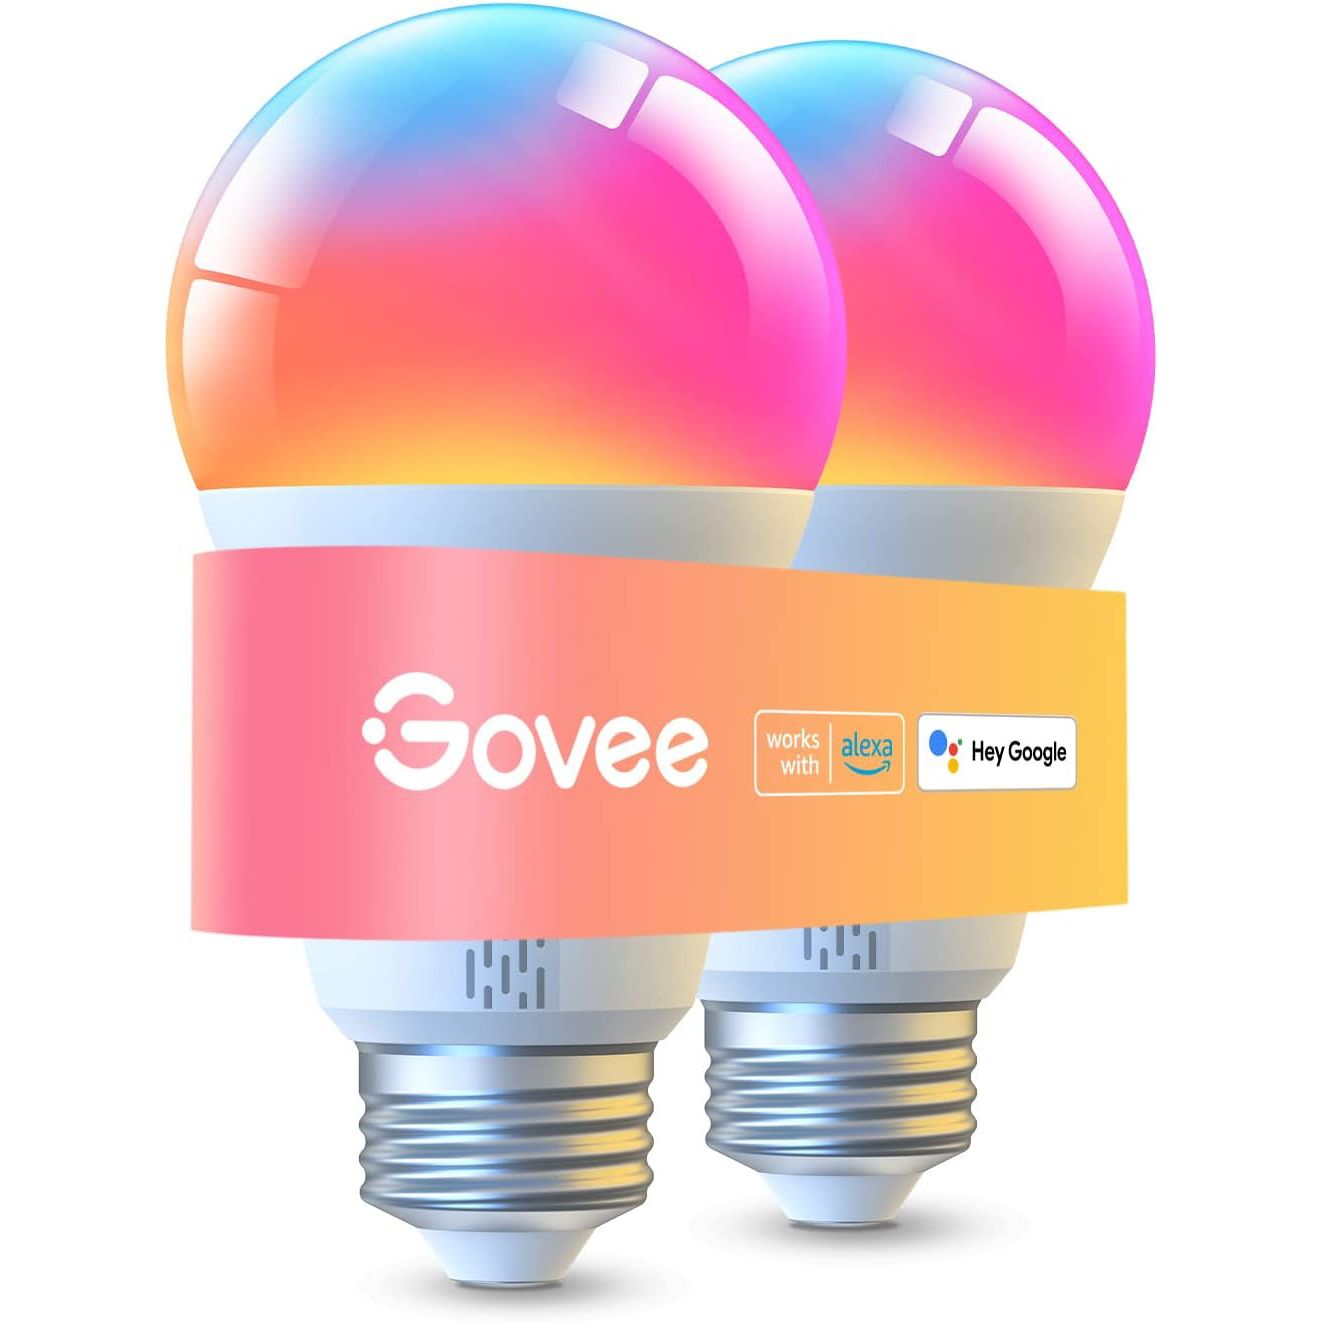 Govee Smart Lighting Savings Are Back This October Prime Day - CNET